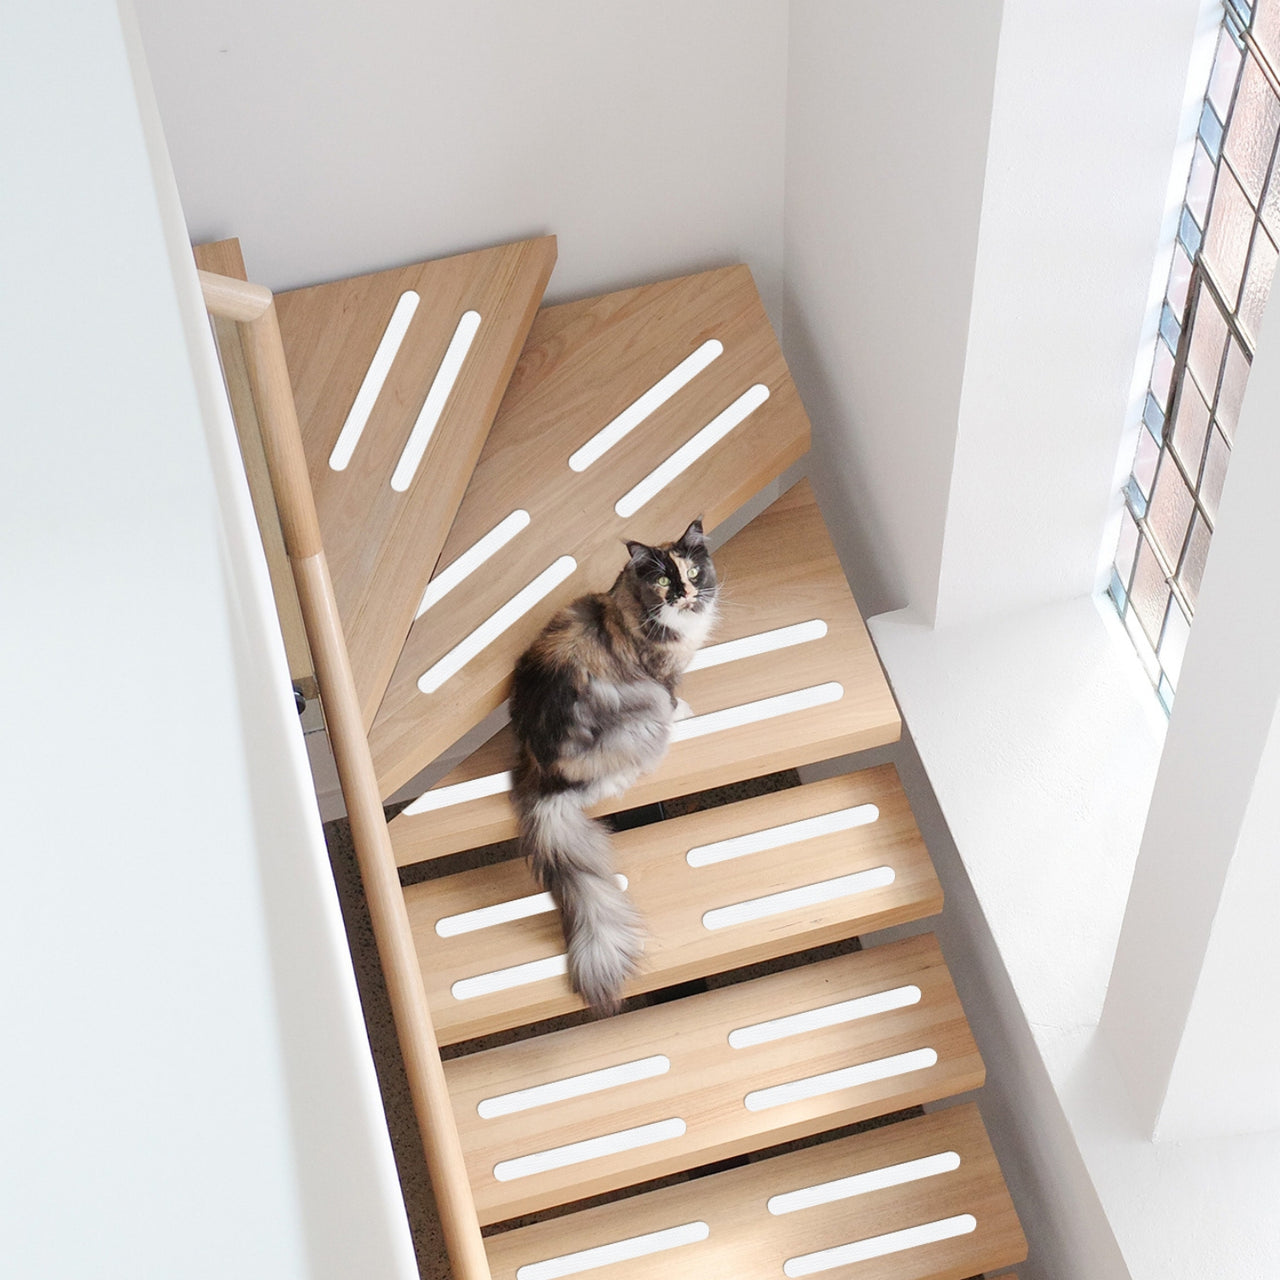 Cat sitting in stairs with white anti slip grips